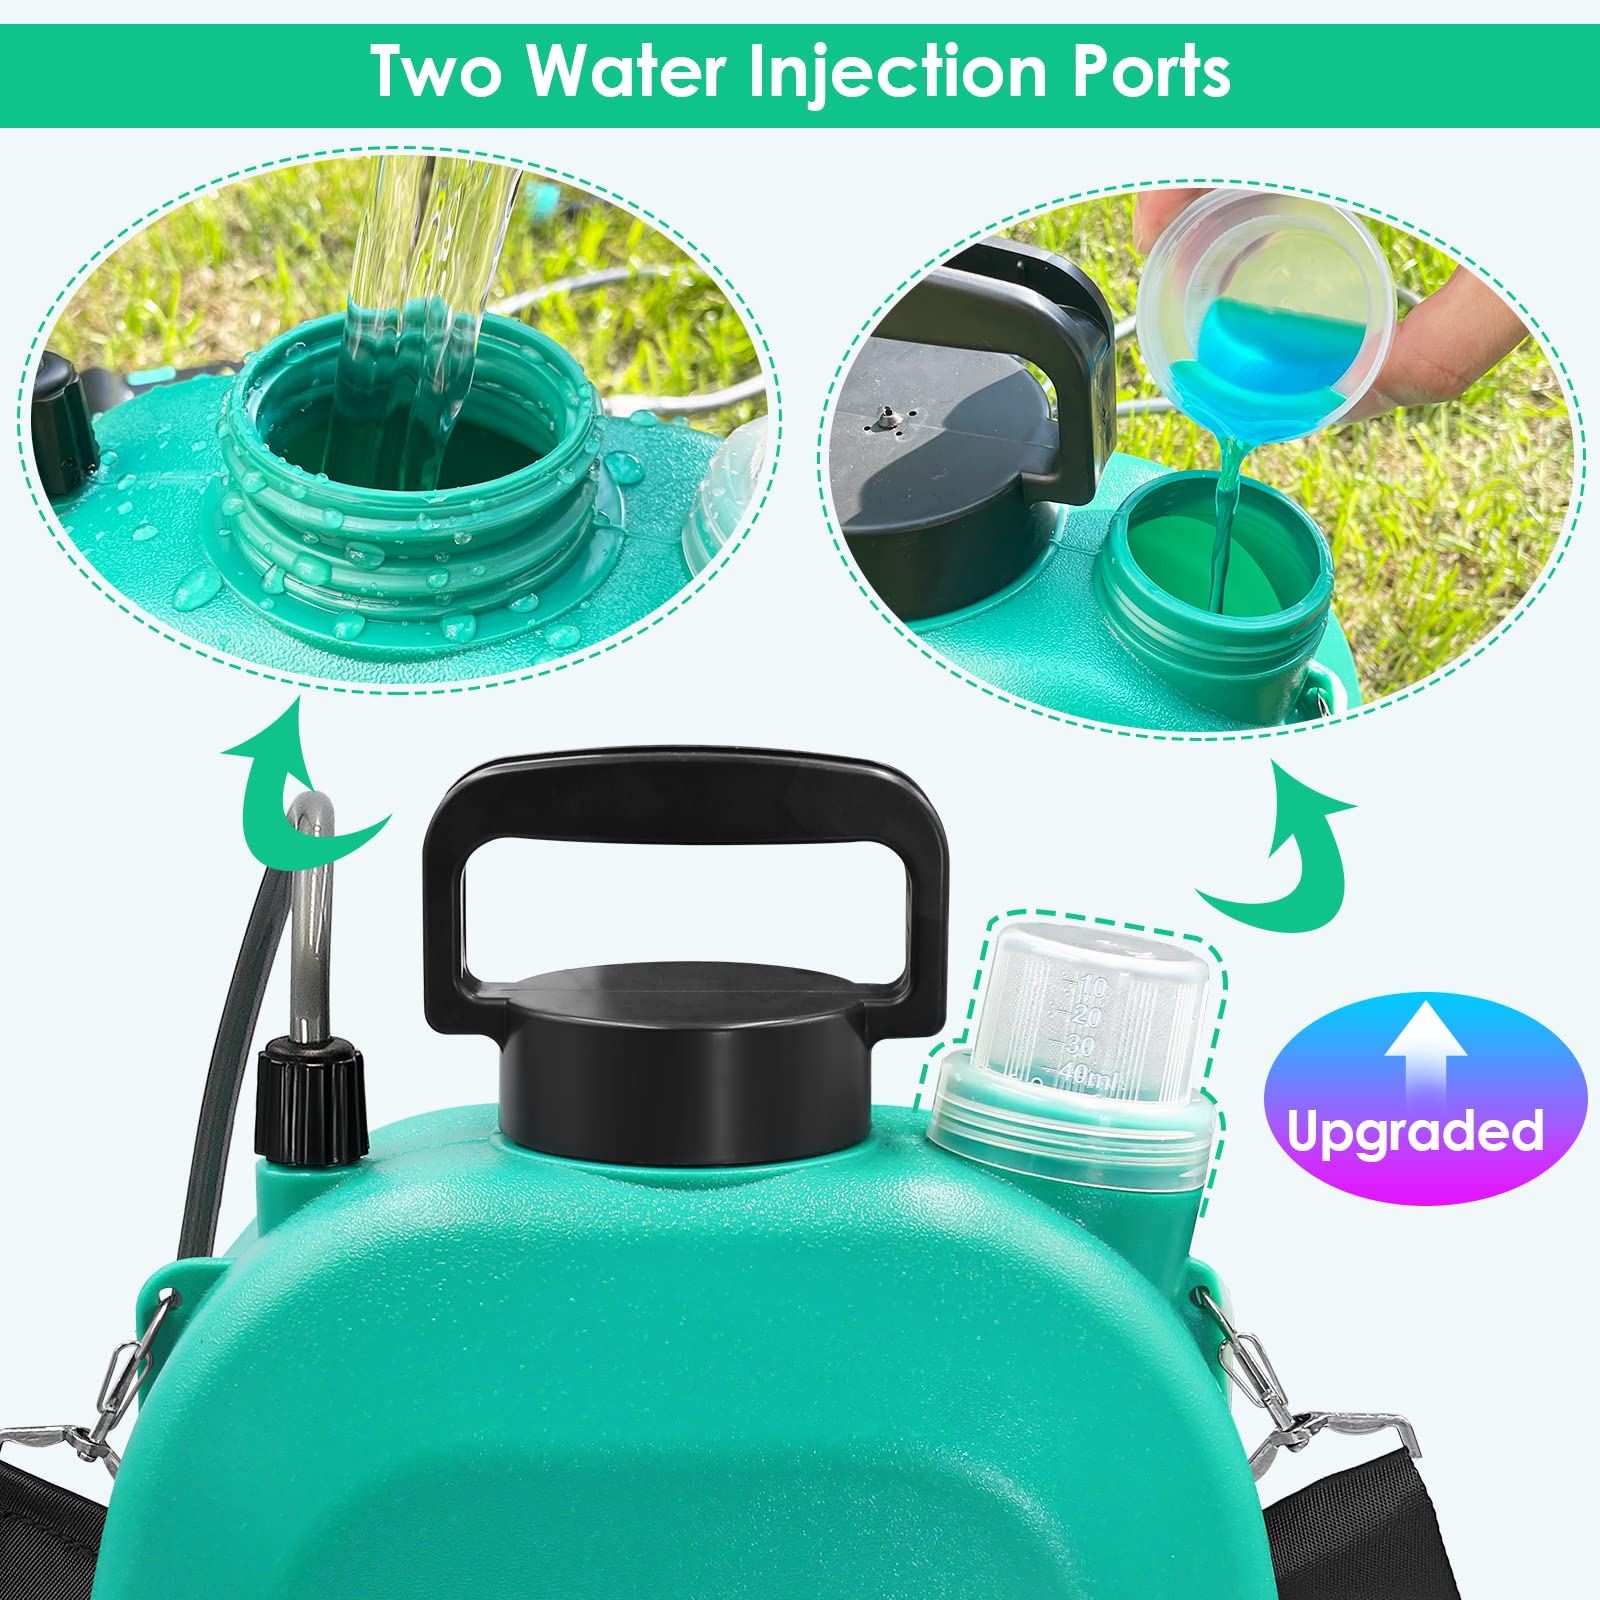 Battery Powered Sprayer 1.35Gallon, Upgrade Electric Sprayer with 3 Mist Nozzles, USB Rechargeable Handle and Retractable Wand, Garden Sprayer with Adjustable Shoulder Strap for Lawn,Garden,Cleaning